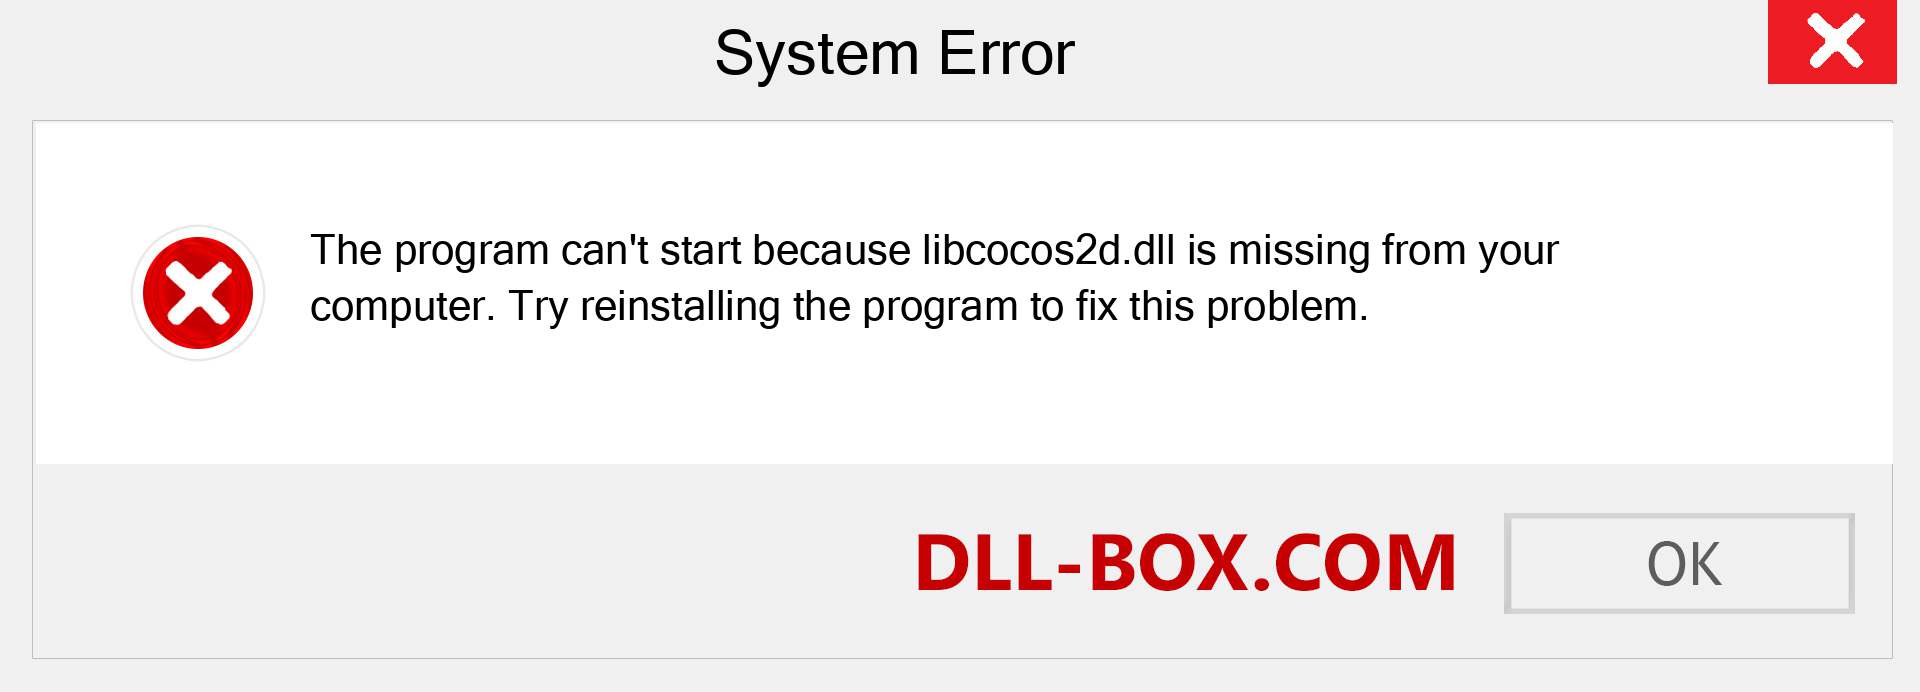  libcocos2d.dll file is missing?. Download for Windows 7, 8, 10 - Fix  libcocos2d dll Missing Error on Windows, photos, images